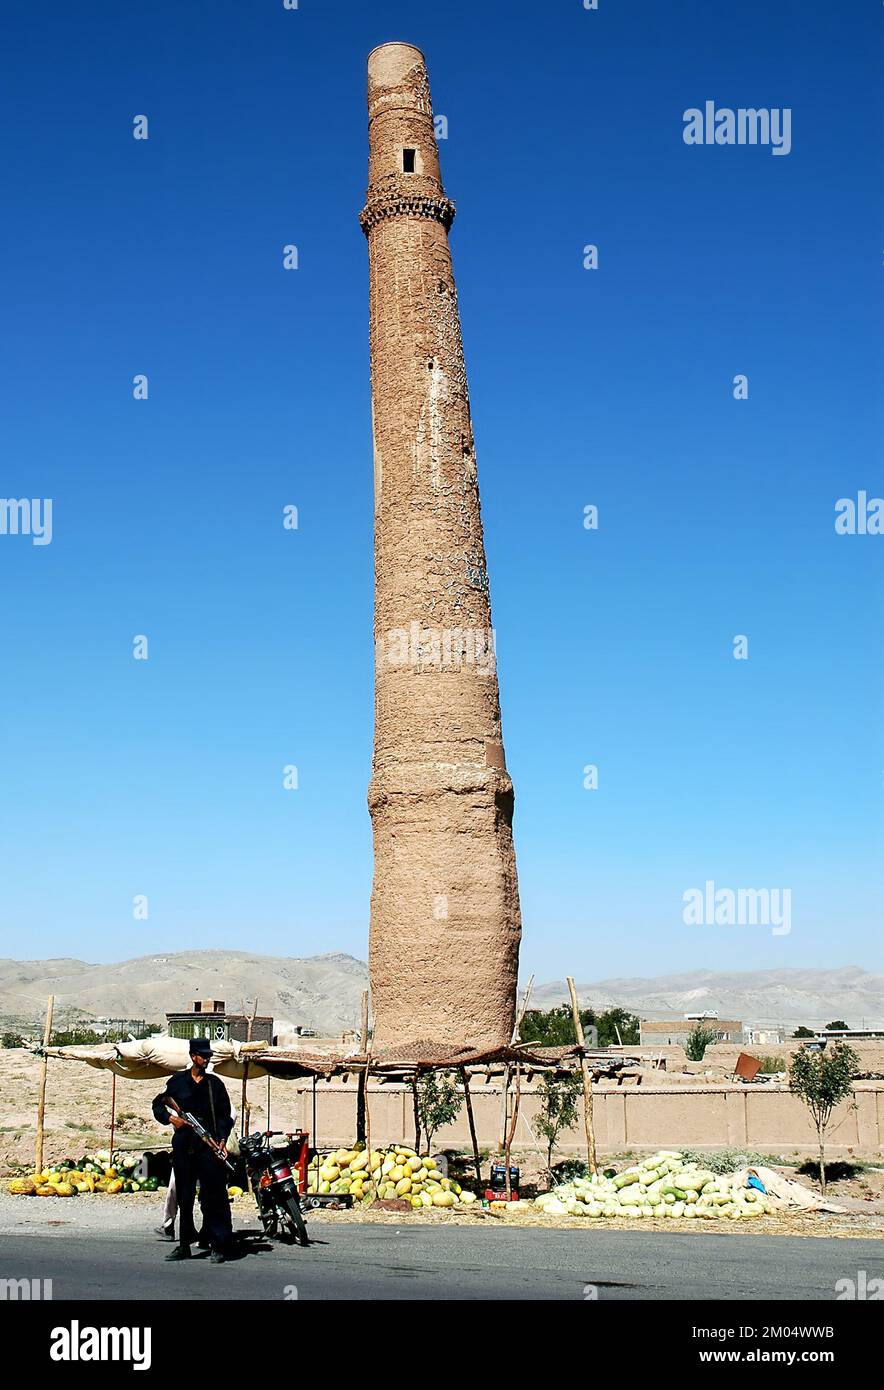 Herat / Afghanistan: One of the Musalla Minarets of Herat part of the Musalla Complex. Five ruined minarets remain standing. Stock Photo